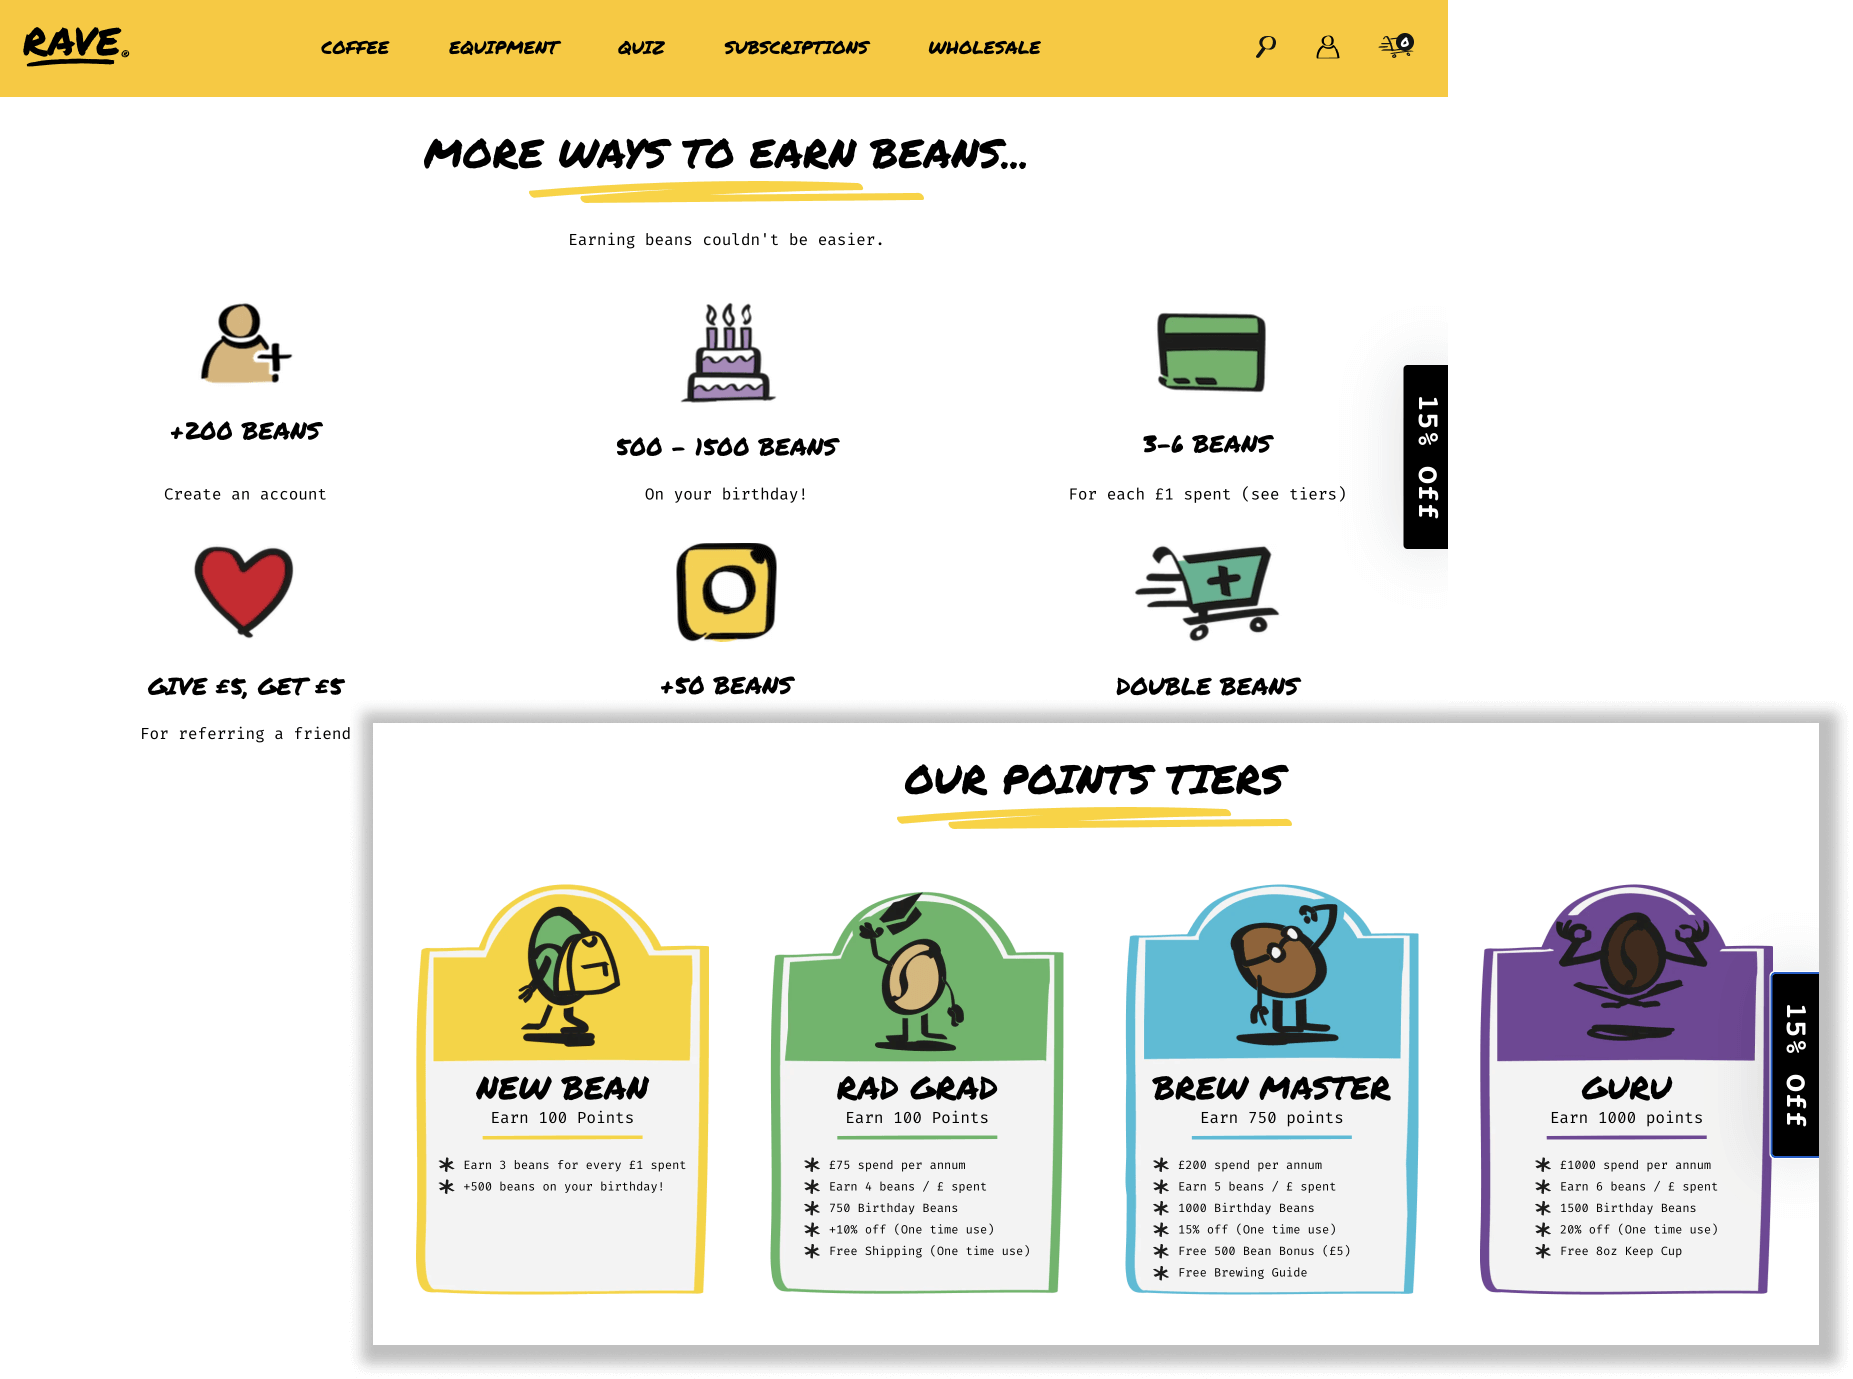 A screenshot from RAVE Coffee’s rewards program explainer page showing different ways to earn “beans” or points and the different VIP tiers customers can earn. 